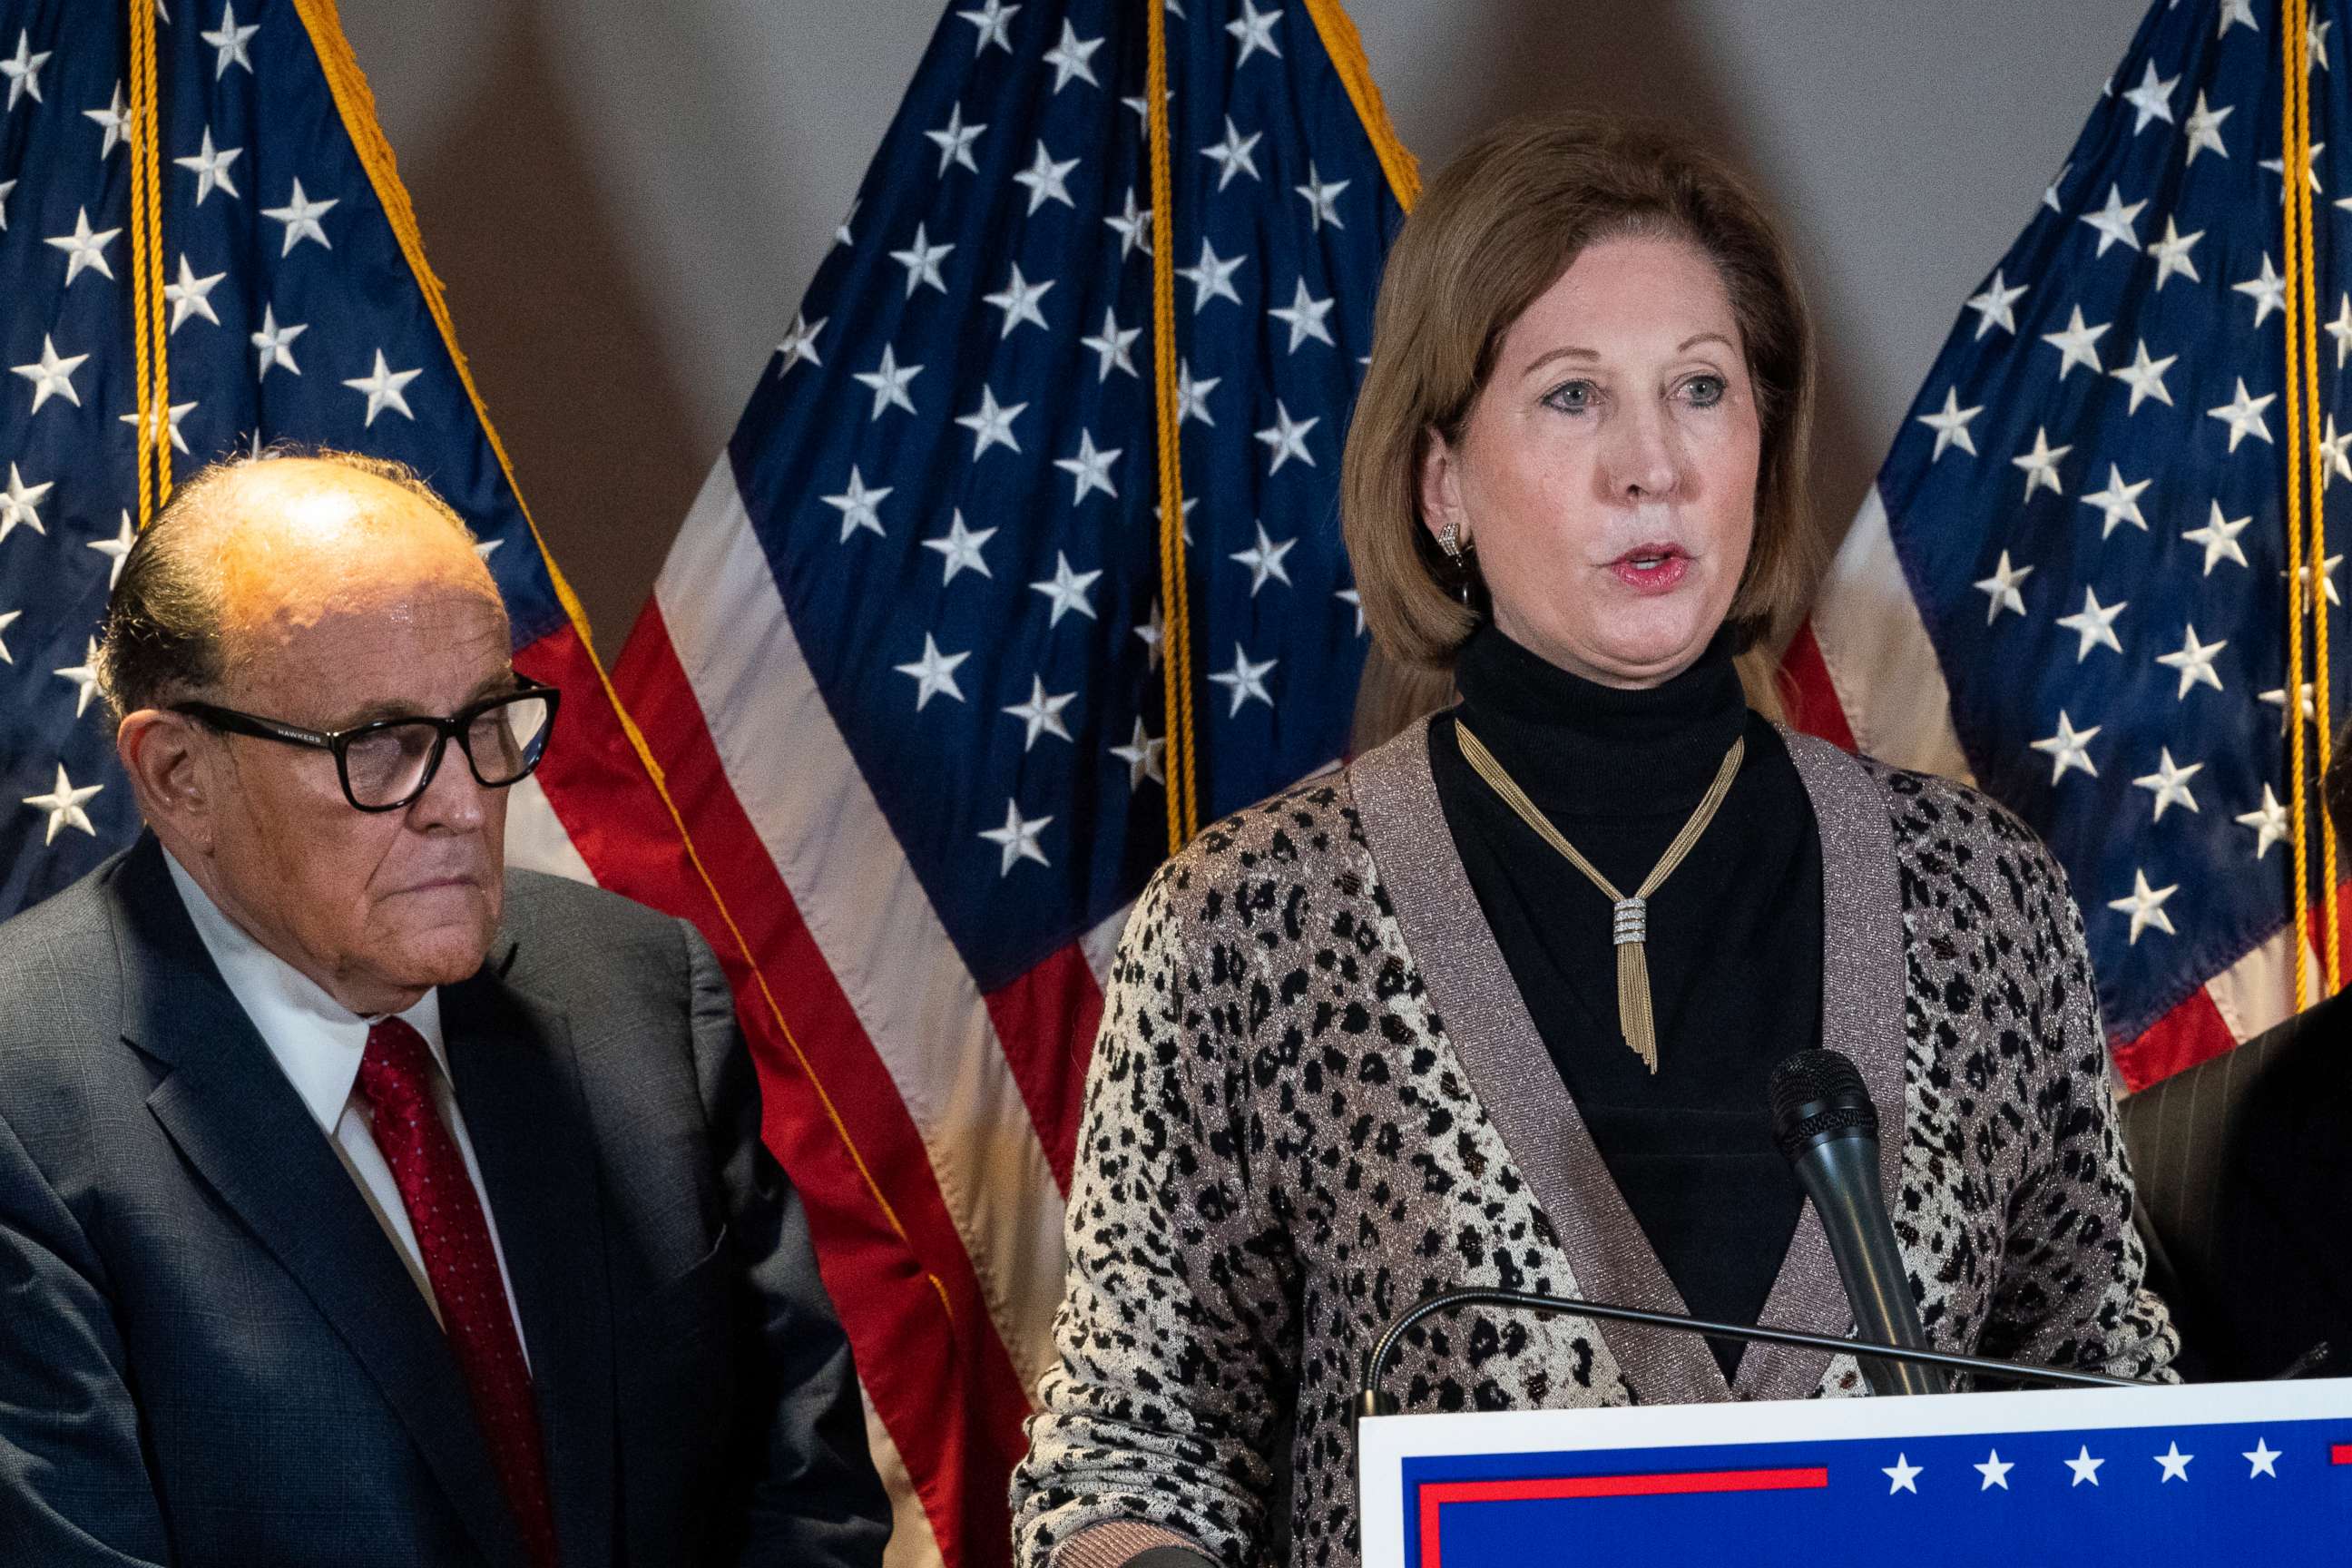 PHOTO: Sidney Powell, right, speaks next to former Mayor of New York Rudy Giuliani, as members of President Donald Trump's legal team, during a news conference at the Republican National Committee headquarters, Thursday Nov. 19.